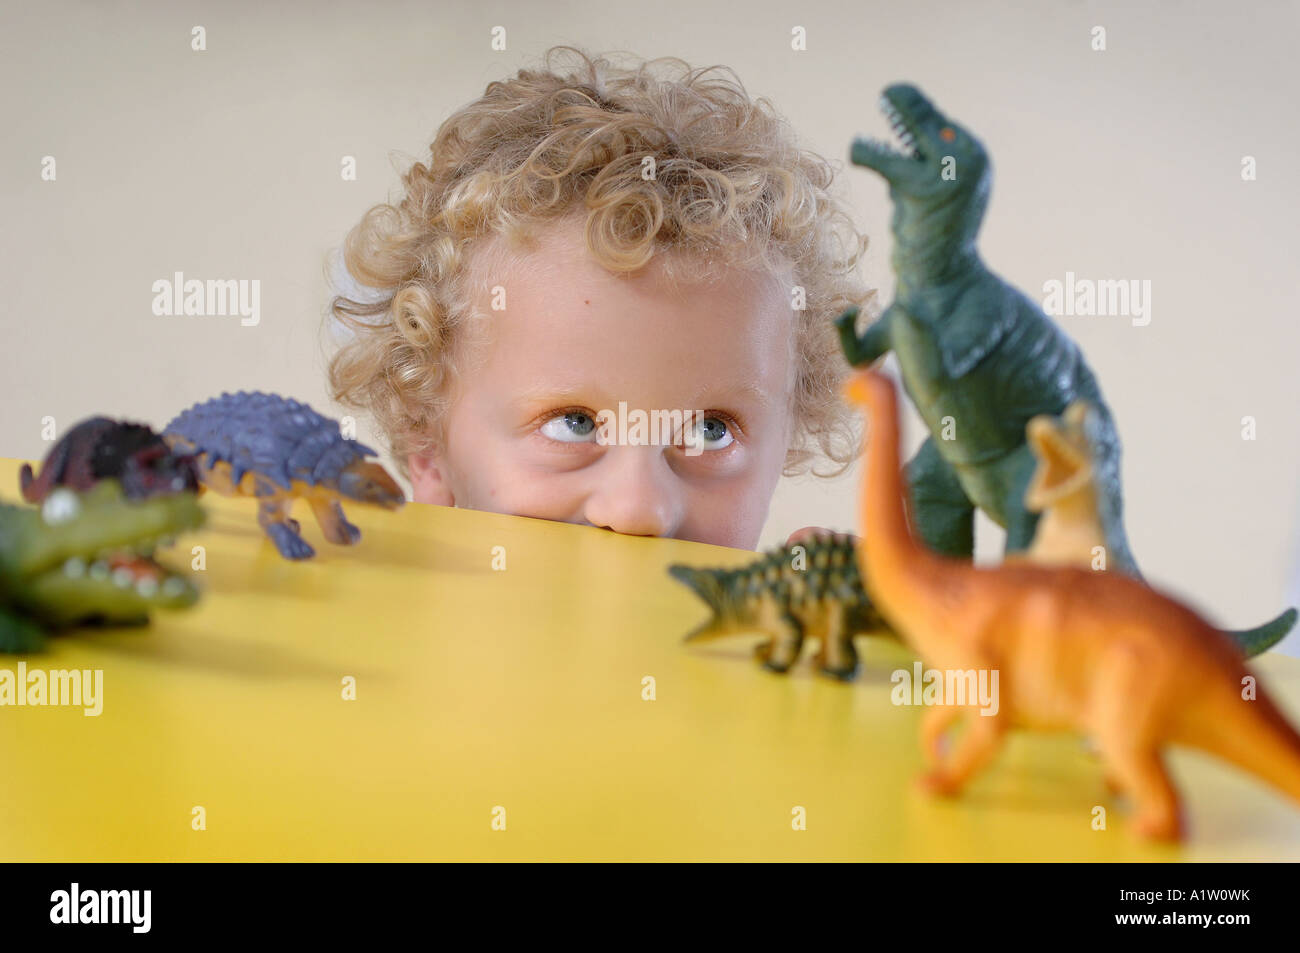 A young boy playing with dinosaurs at a nursery school Stock Photo